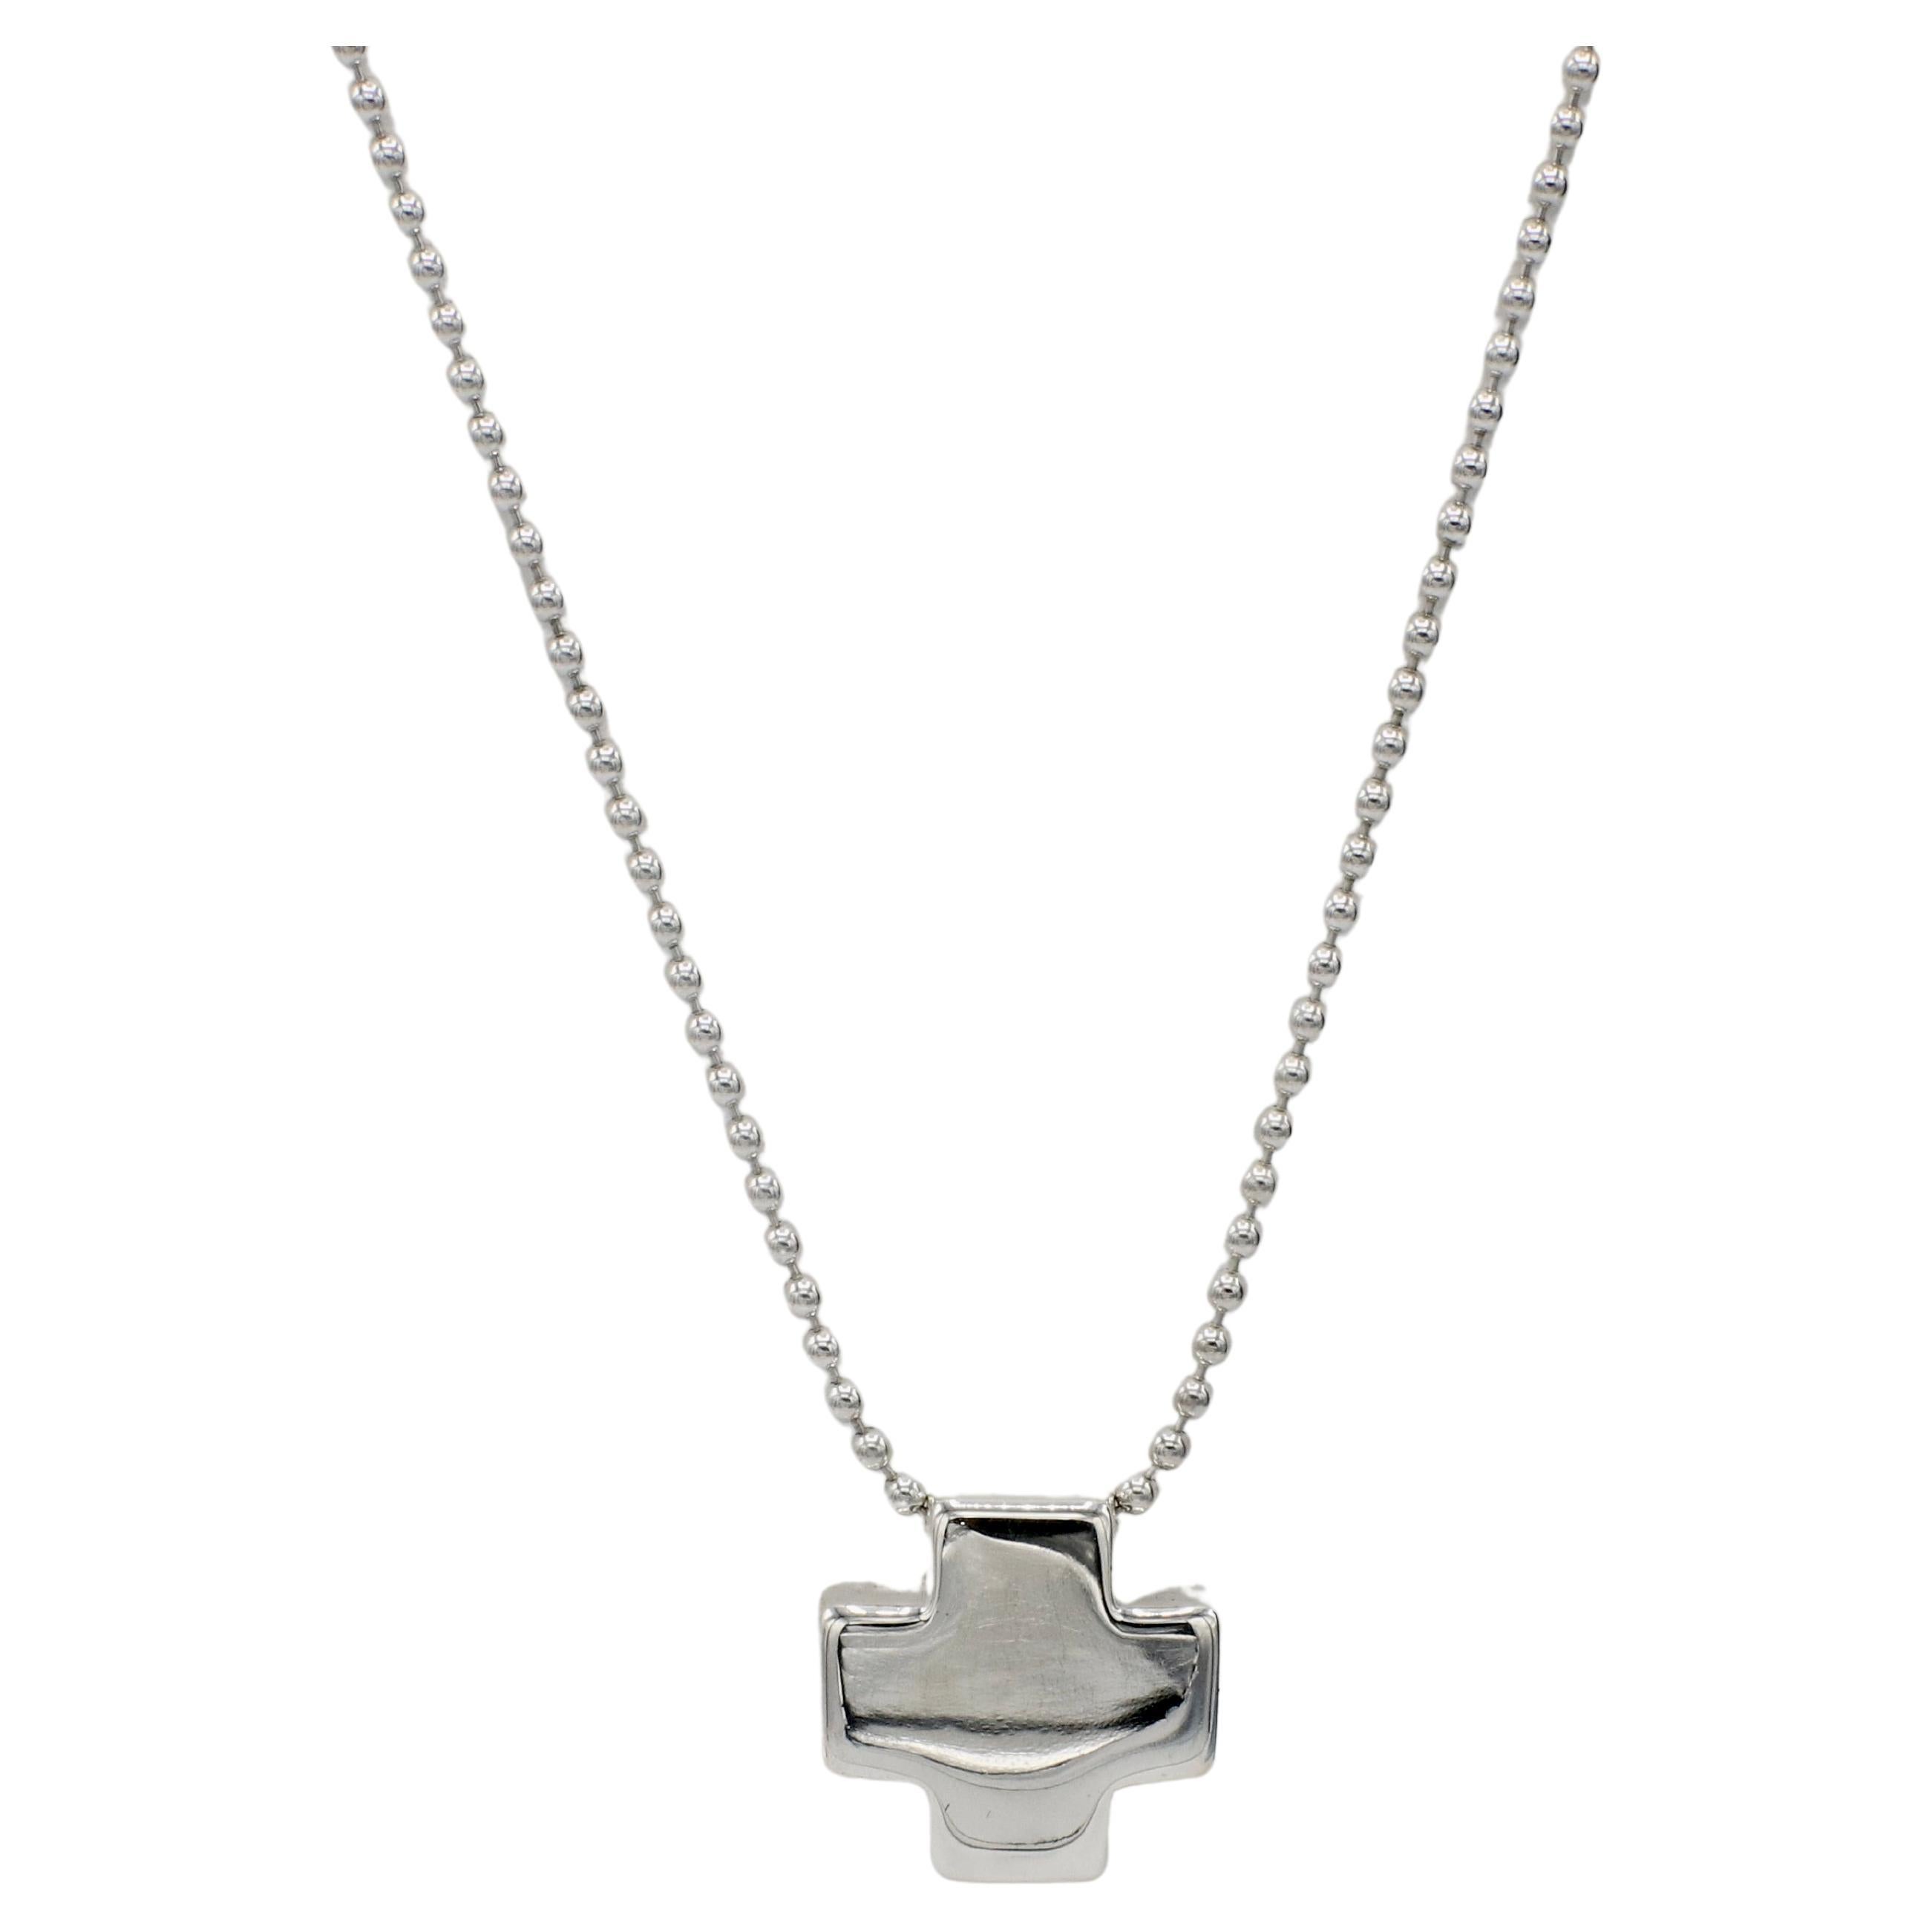 Tiffany & Co. Sterling SIlver Cross Pendant Necklace on Bead Chain 
Metal: Sterling silver 925
Weight: 13.79 grams
Cross: 17 x 17mm
Chain length: 15.5 inches
Chain width: 2mm
Signed: Tiffany & Co. 925 ITALY
